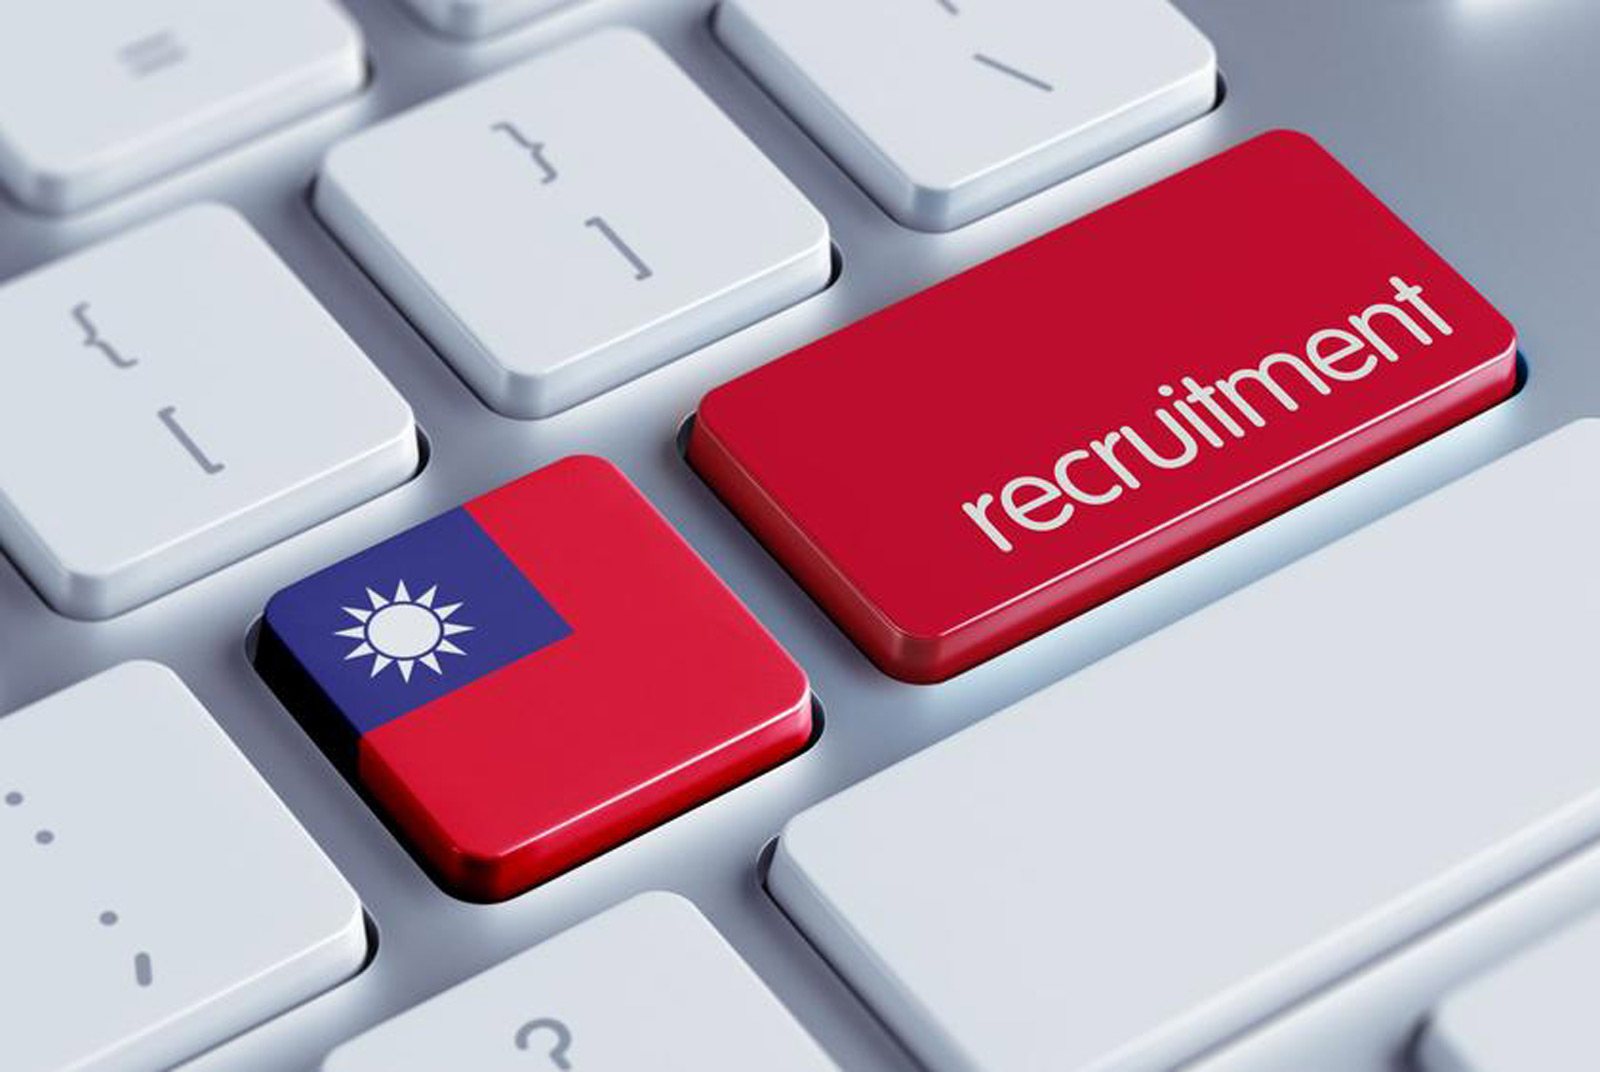 How can Taiwan attract and retain talent, especially from the global south?